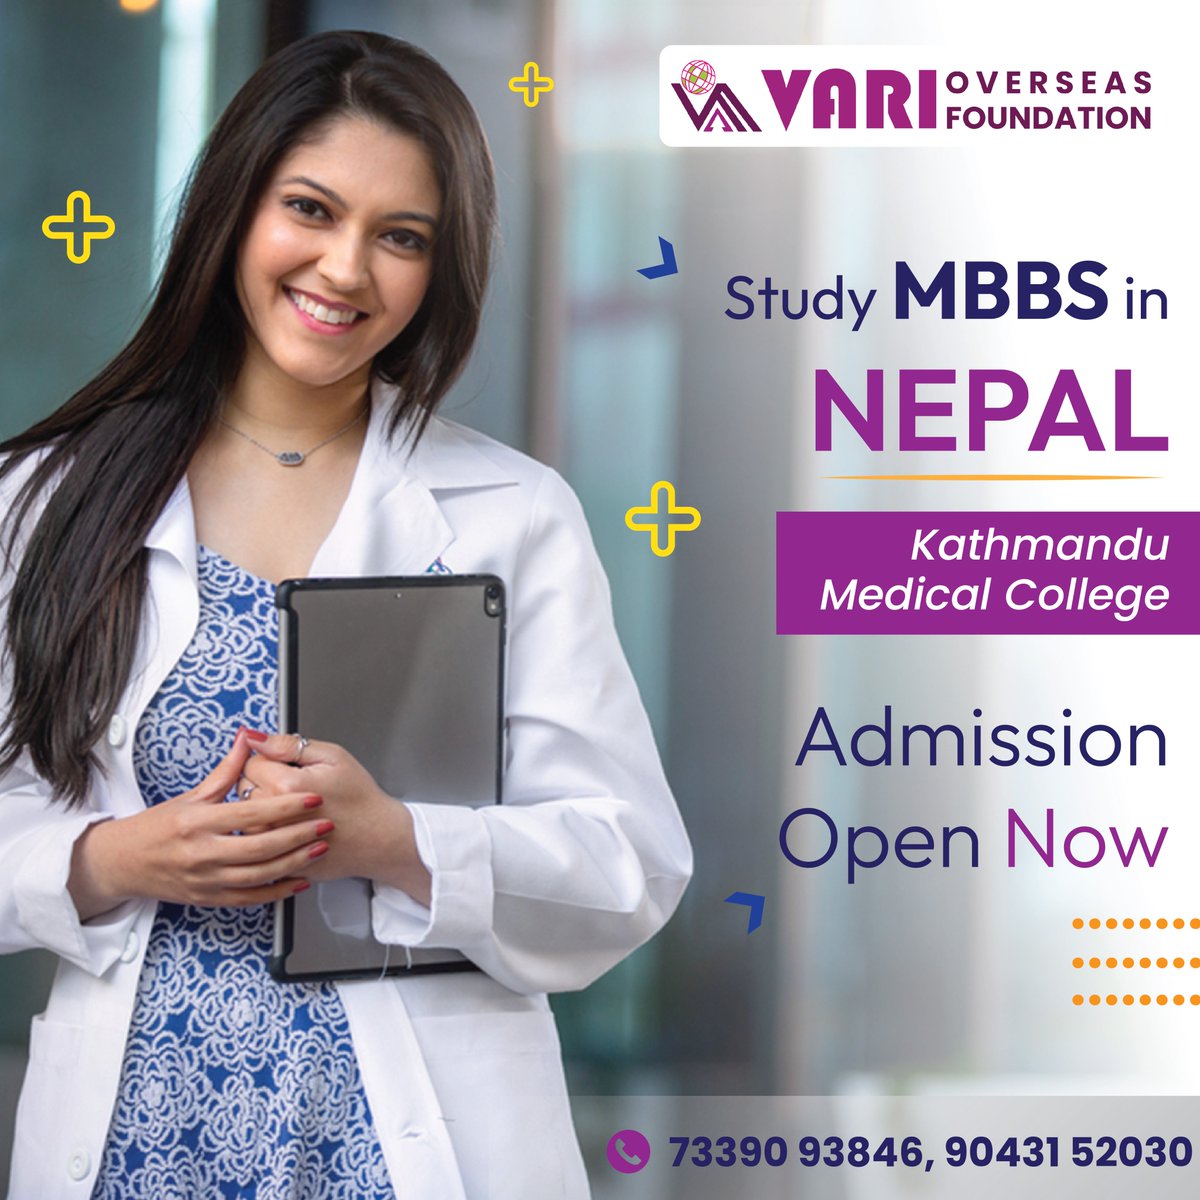 Attention aspiring doctors!🩺

Admissions for MBBS at Kathmandu Medical College in Nepal are now open! 

Contact: 7339093846, 9043152030
Website: variacademy.in

#MBBS #KathmanduMedicalCollege #StudyInNepal #Nepal #student #careers #students #education #mbbsinnepal